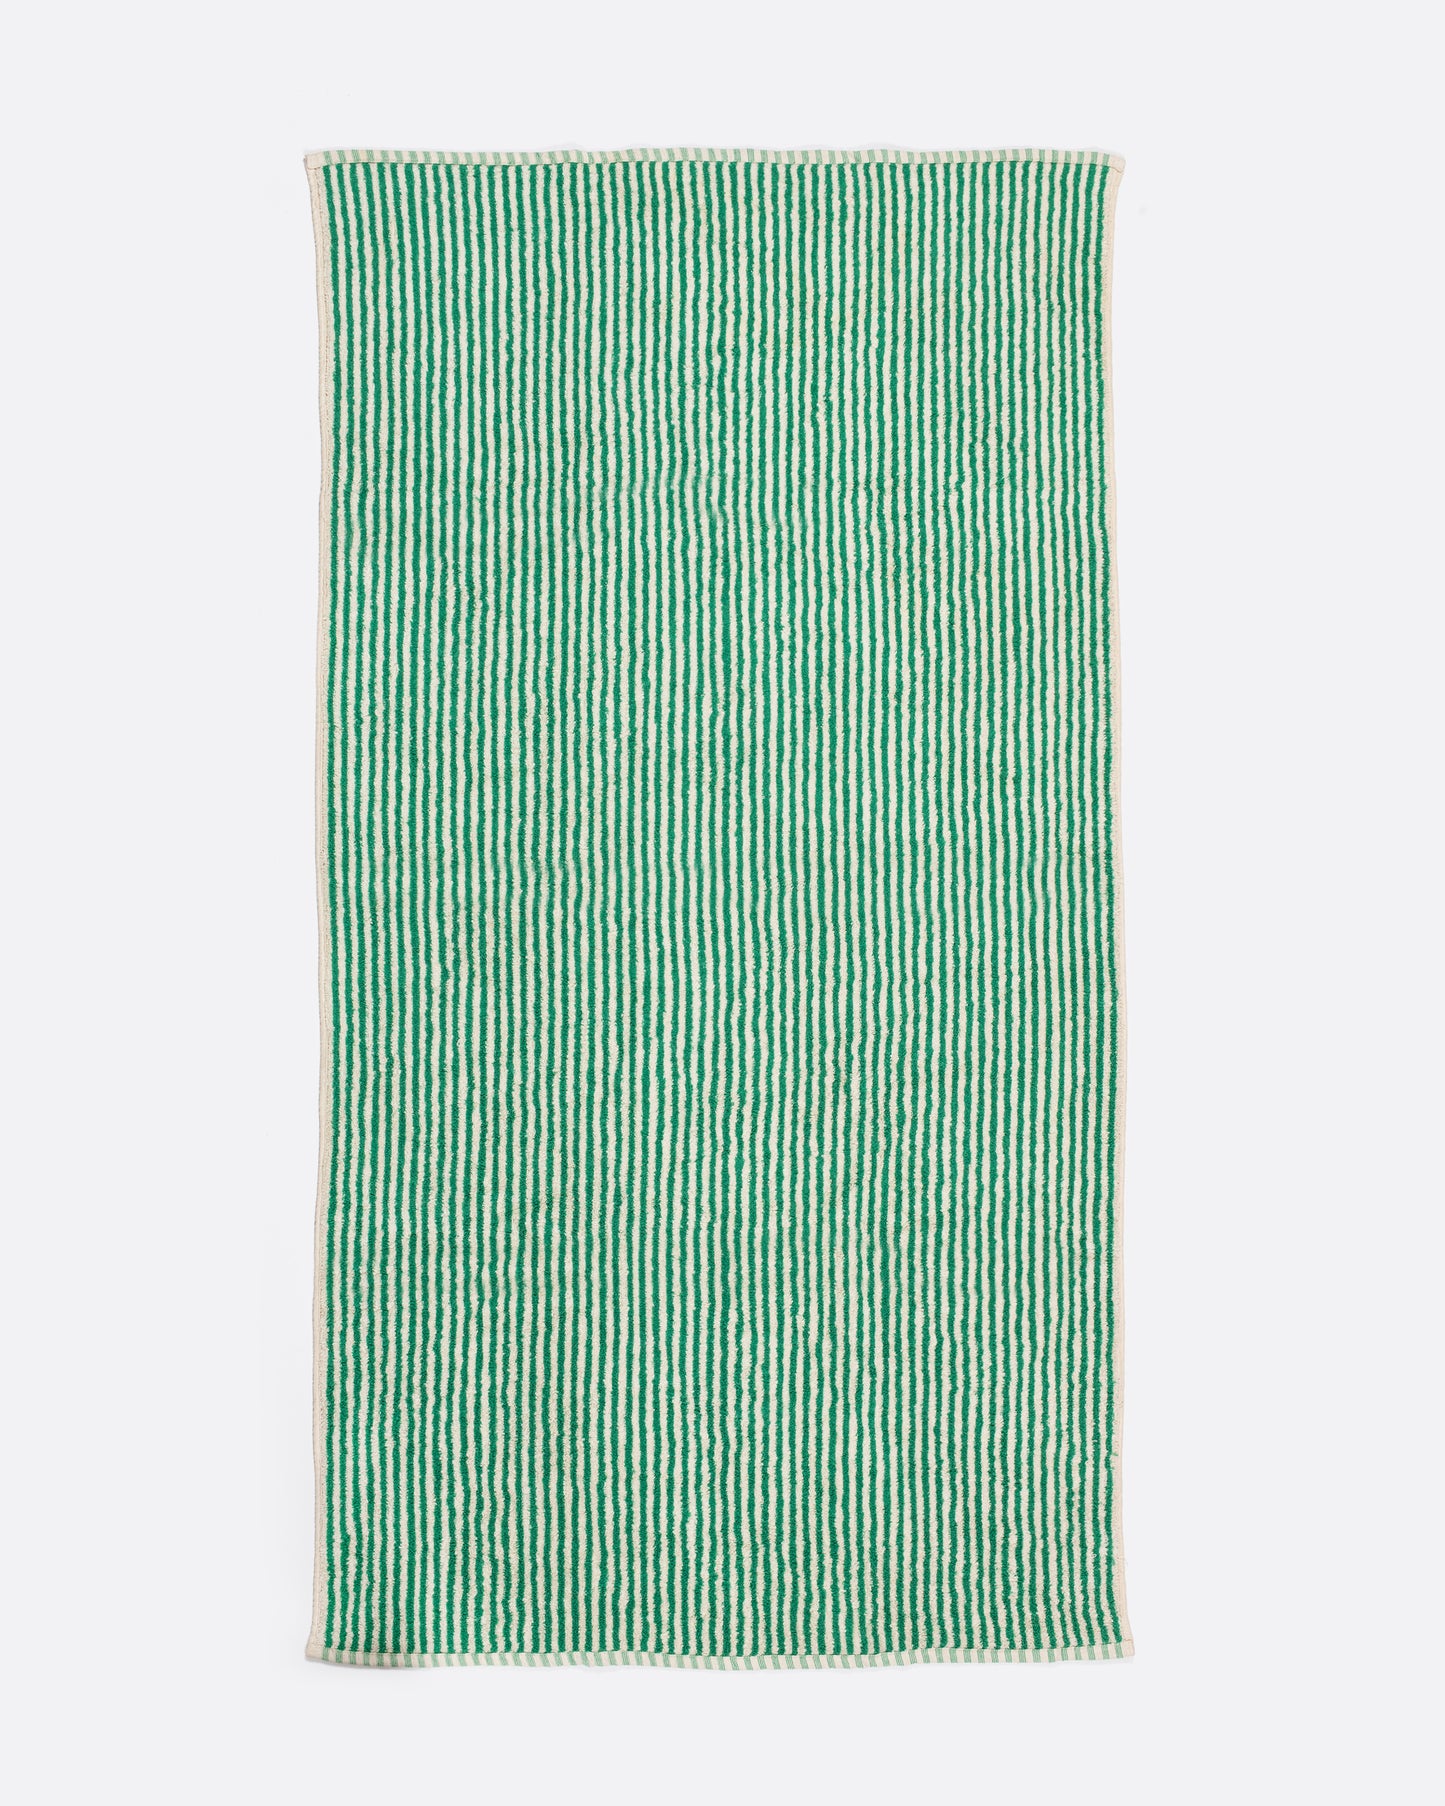 This Turkish bath towel is lightweight but incredibly absorbent. It rolls up easily, making it your new go-to beach and pool companion.